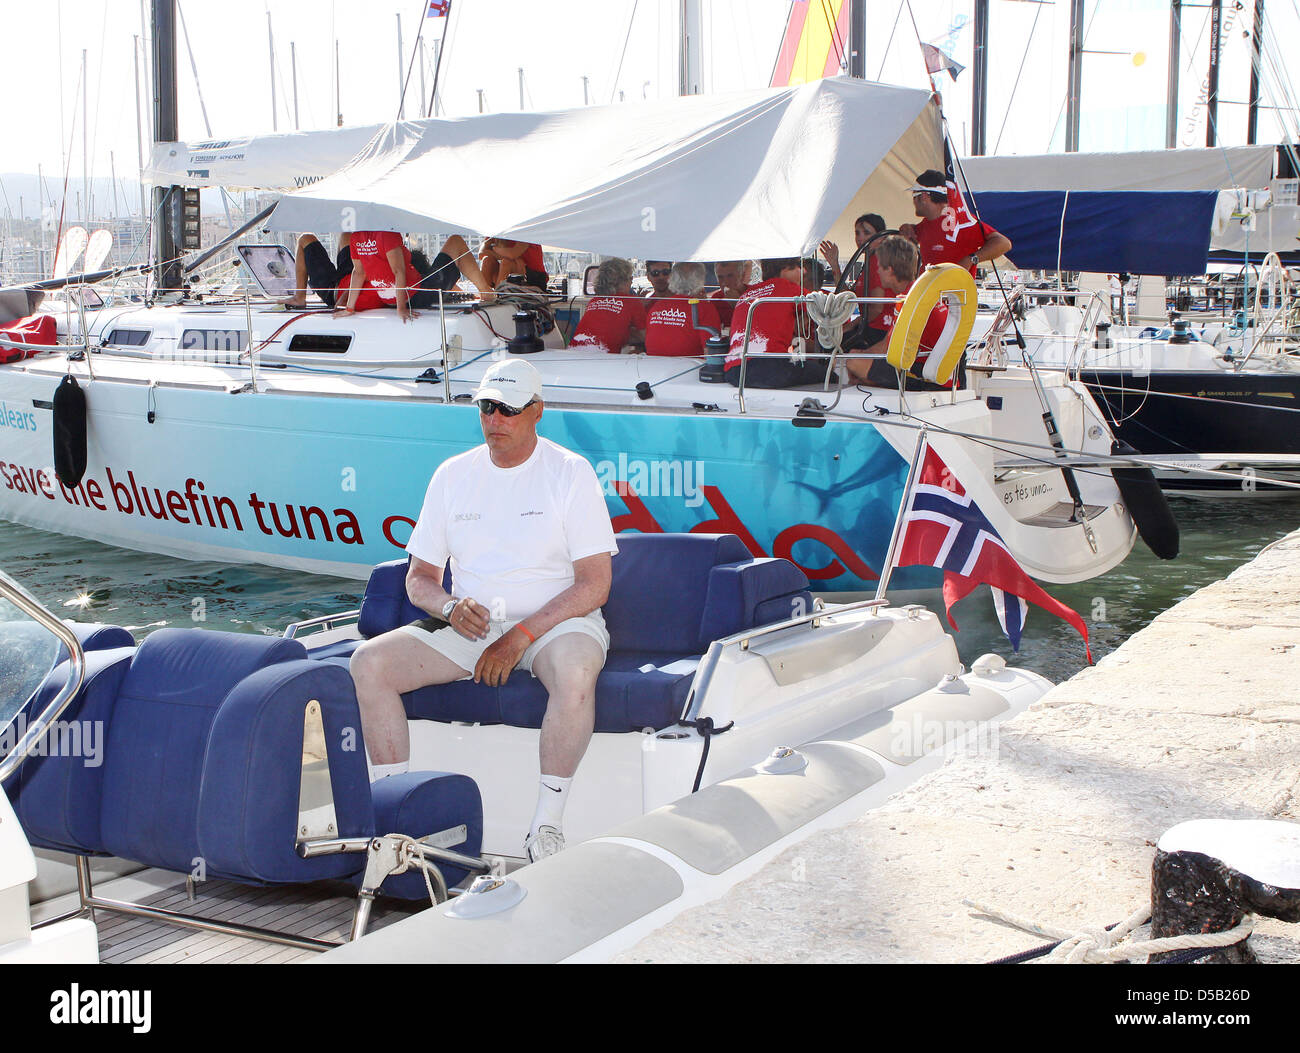 Norwegian King Harald (C) sits on the 'Fram XVI' sailing boat during the first day of the 29th edition of the Sailing King's Cup (Copa del Rey) in Palma de Mallorca, Balearic Islands, Spain, 02 August 2010. Photo: Patrick van Katwijk Stock Photo